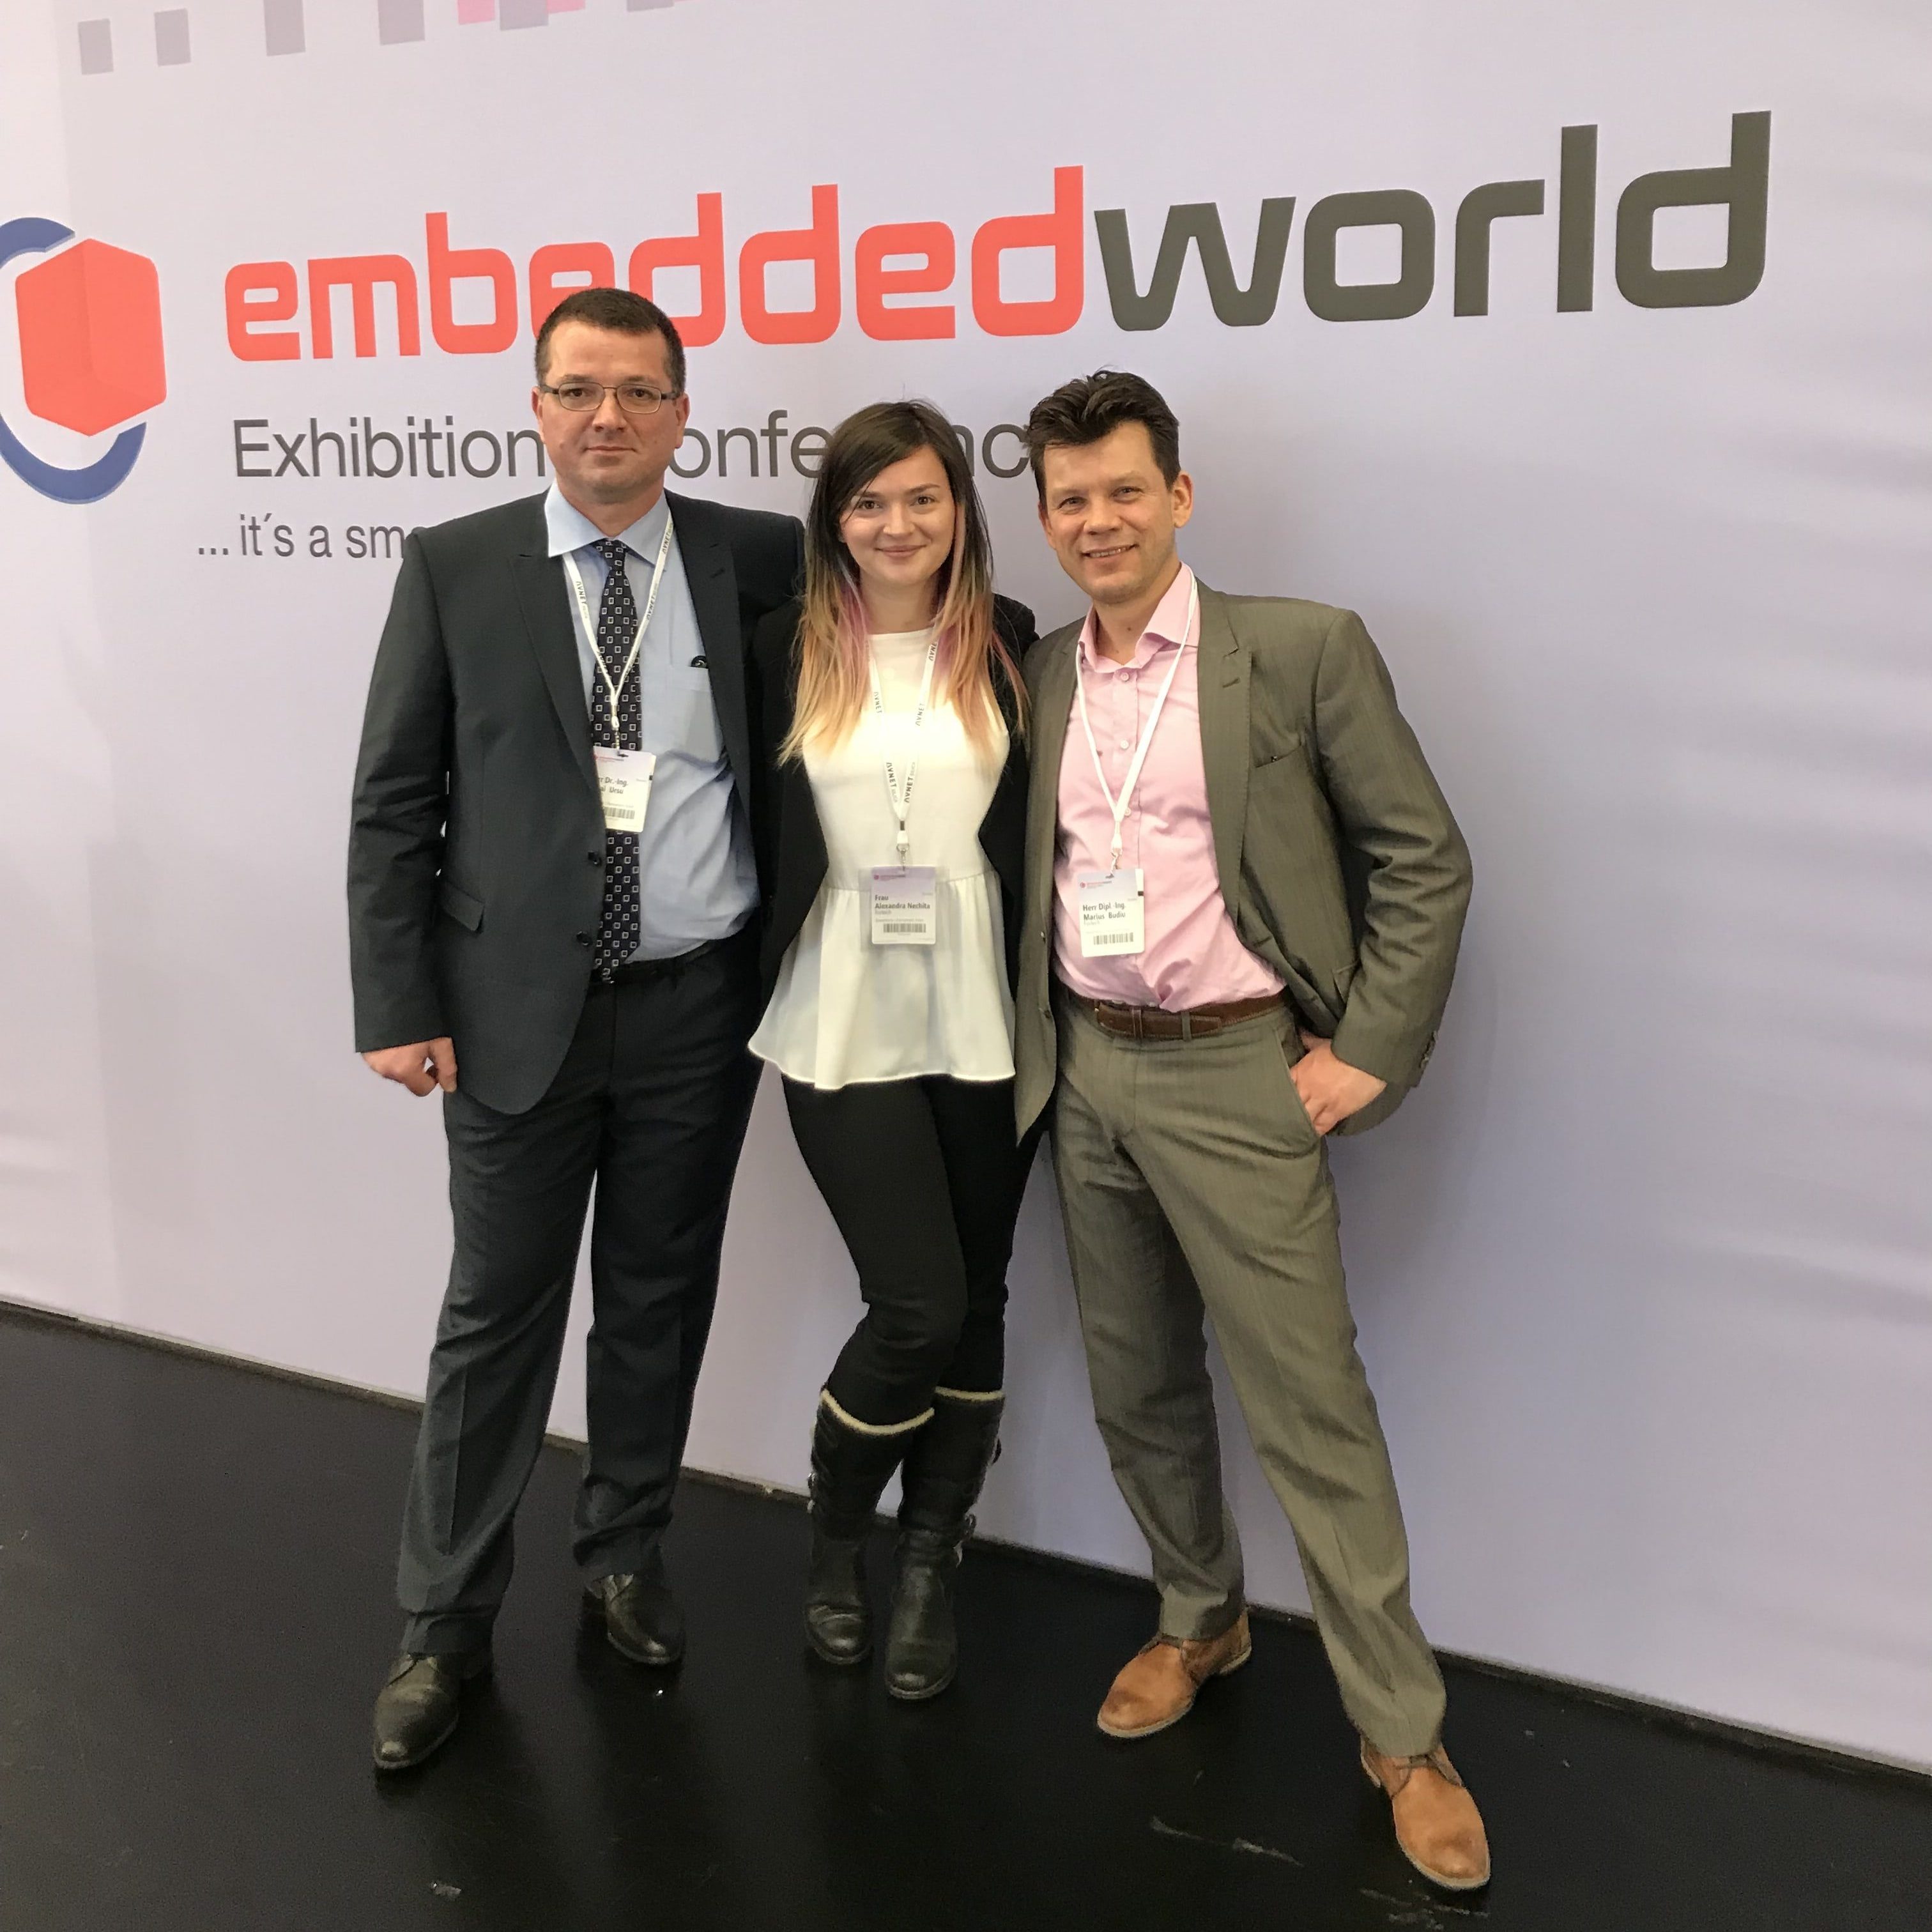 Embedded World Conference